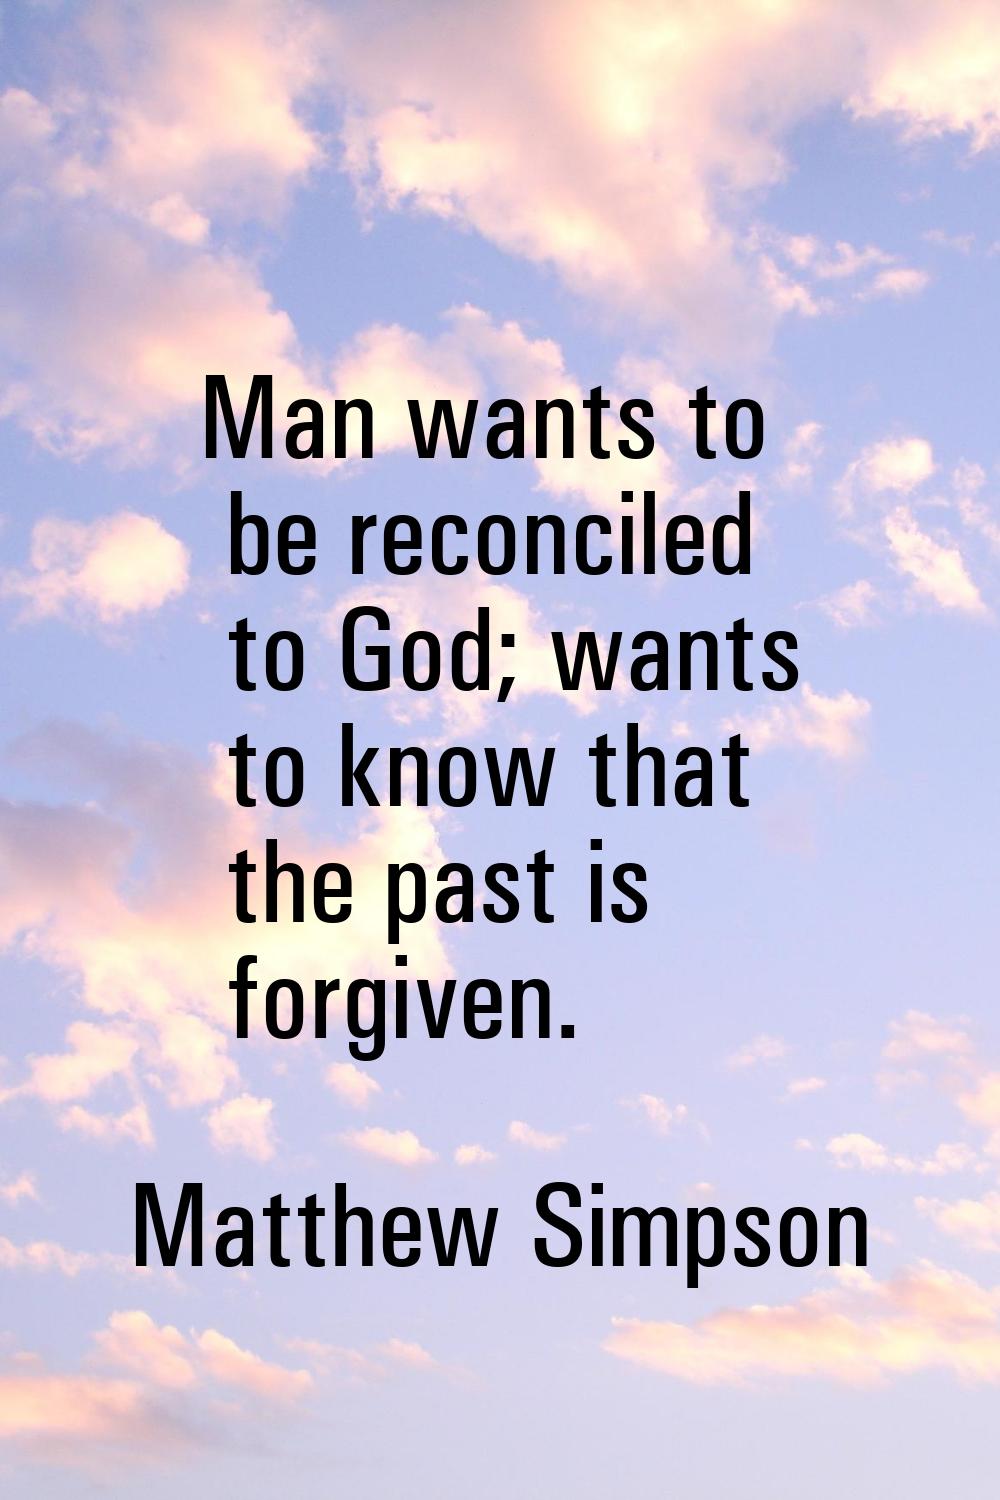 Man wants to be reconciled to God; wants to know that the past is forgiven.